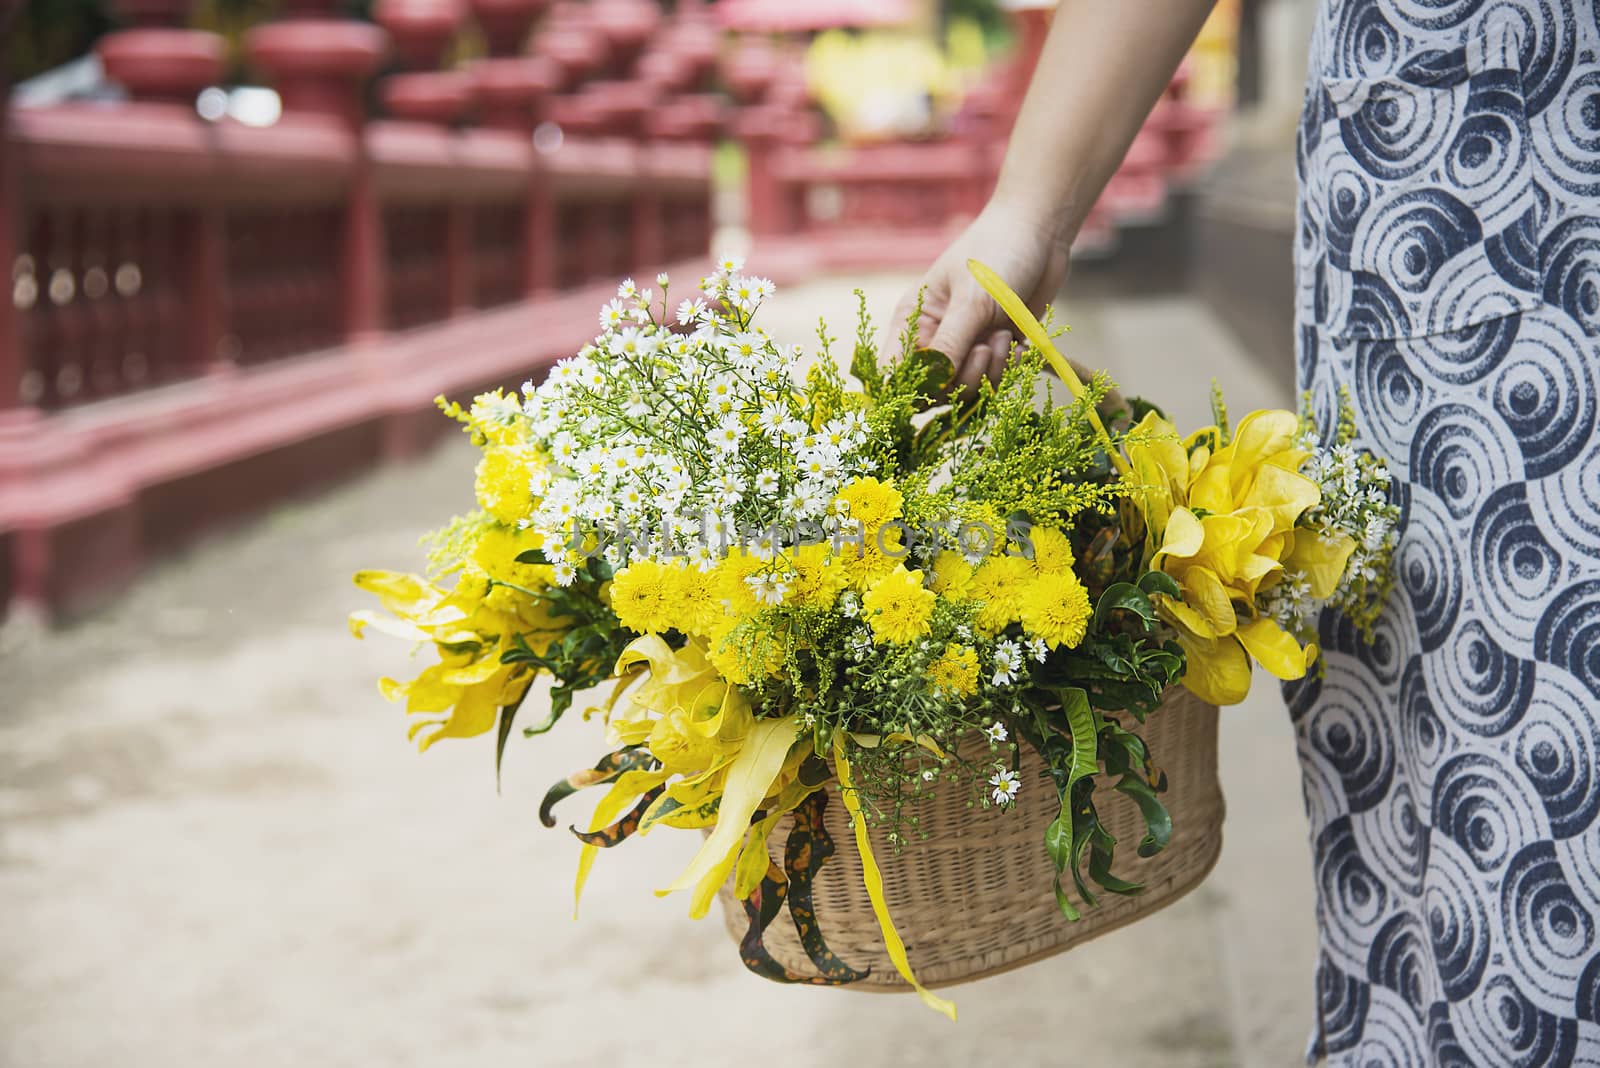 Asian lady holding fresh yellow flowers basket for participation local traditional Buddhist  ceremony - people with religion relationship concept by pairhandmade